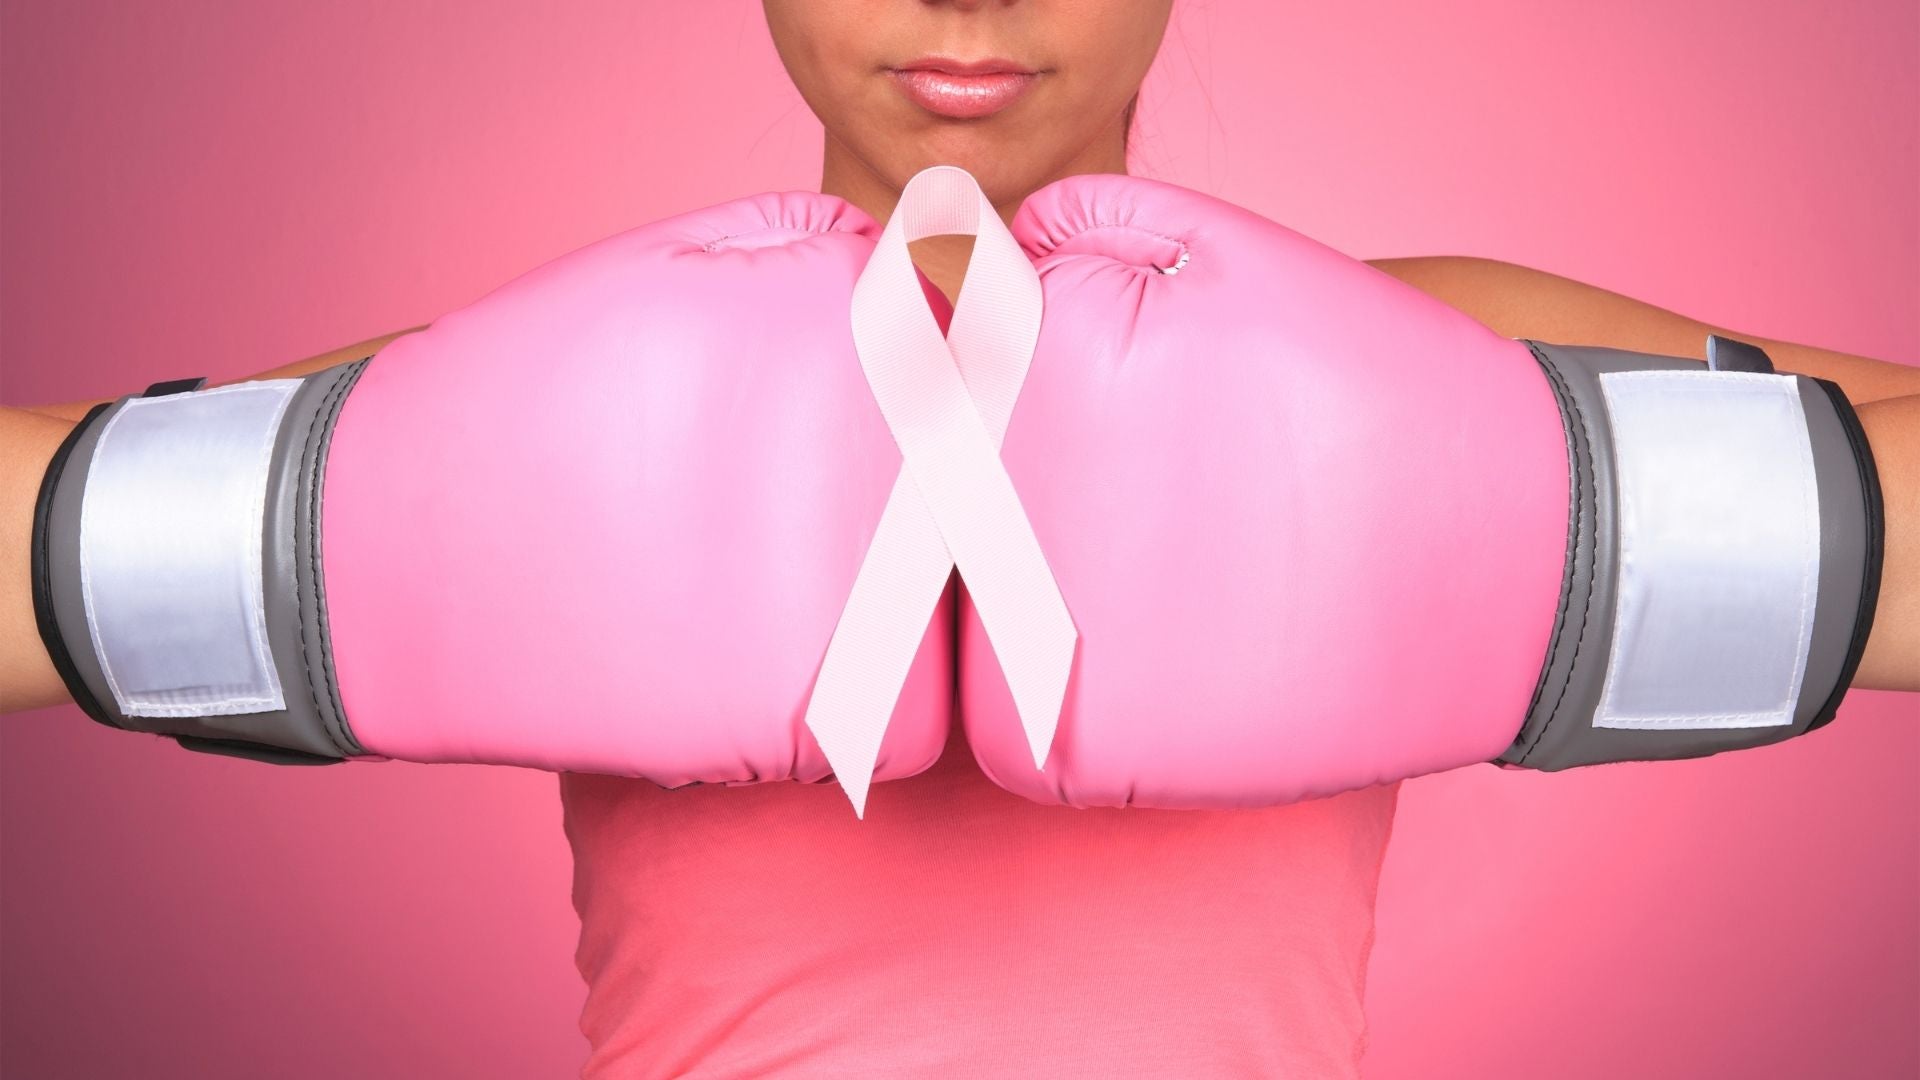 breast cancer, psychological and physical fight